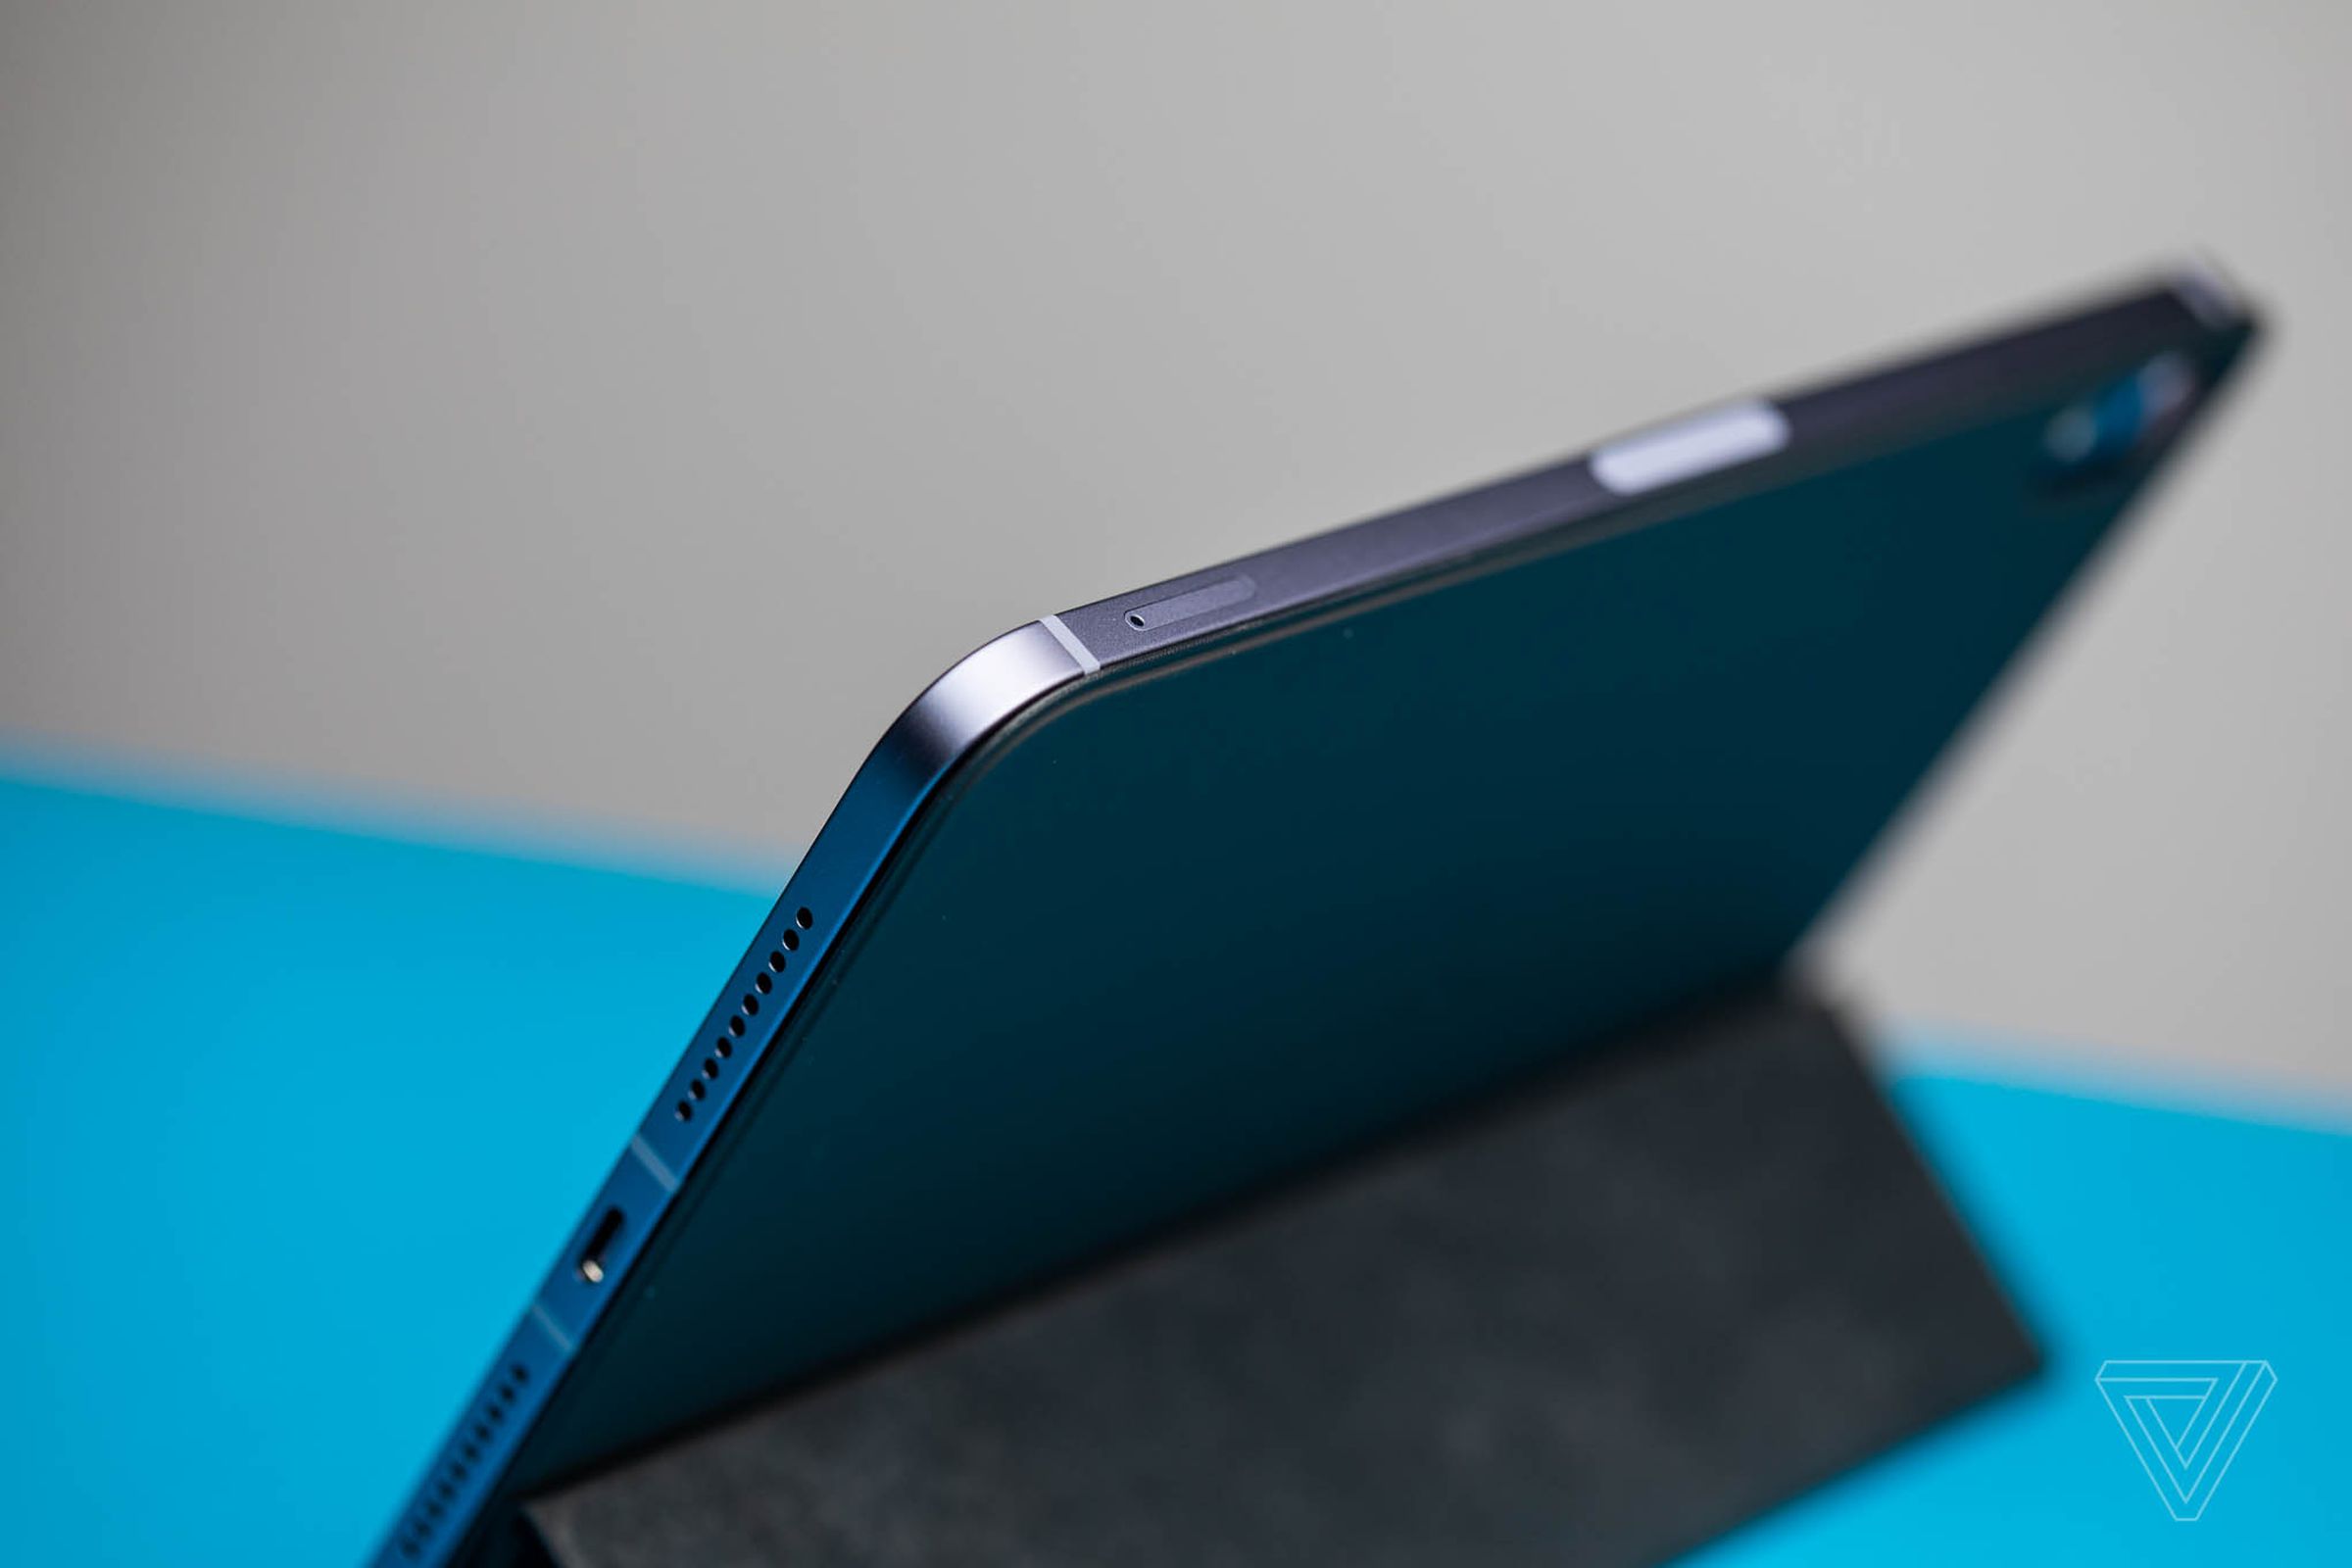 The squared off sides bring the Mini in line with the iPad Pro and iPad Air’s designs.